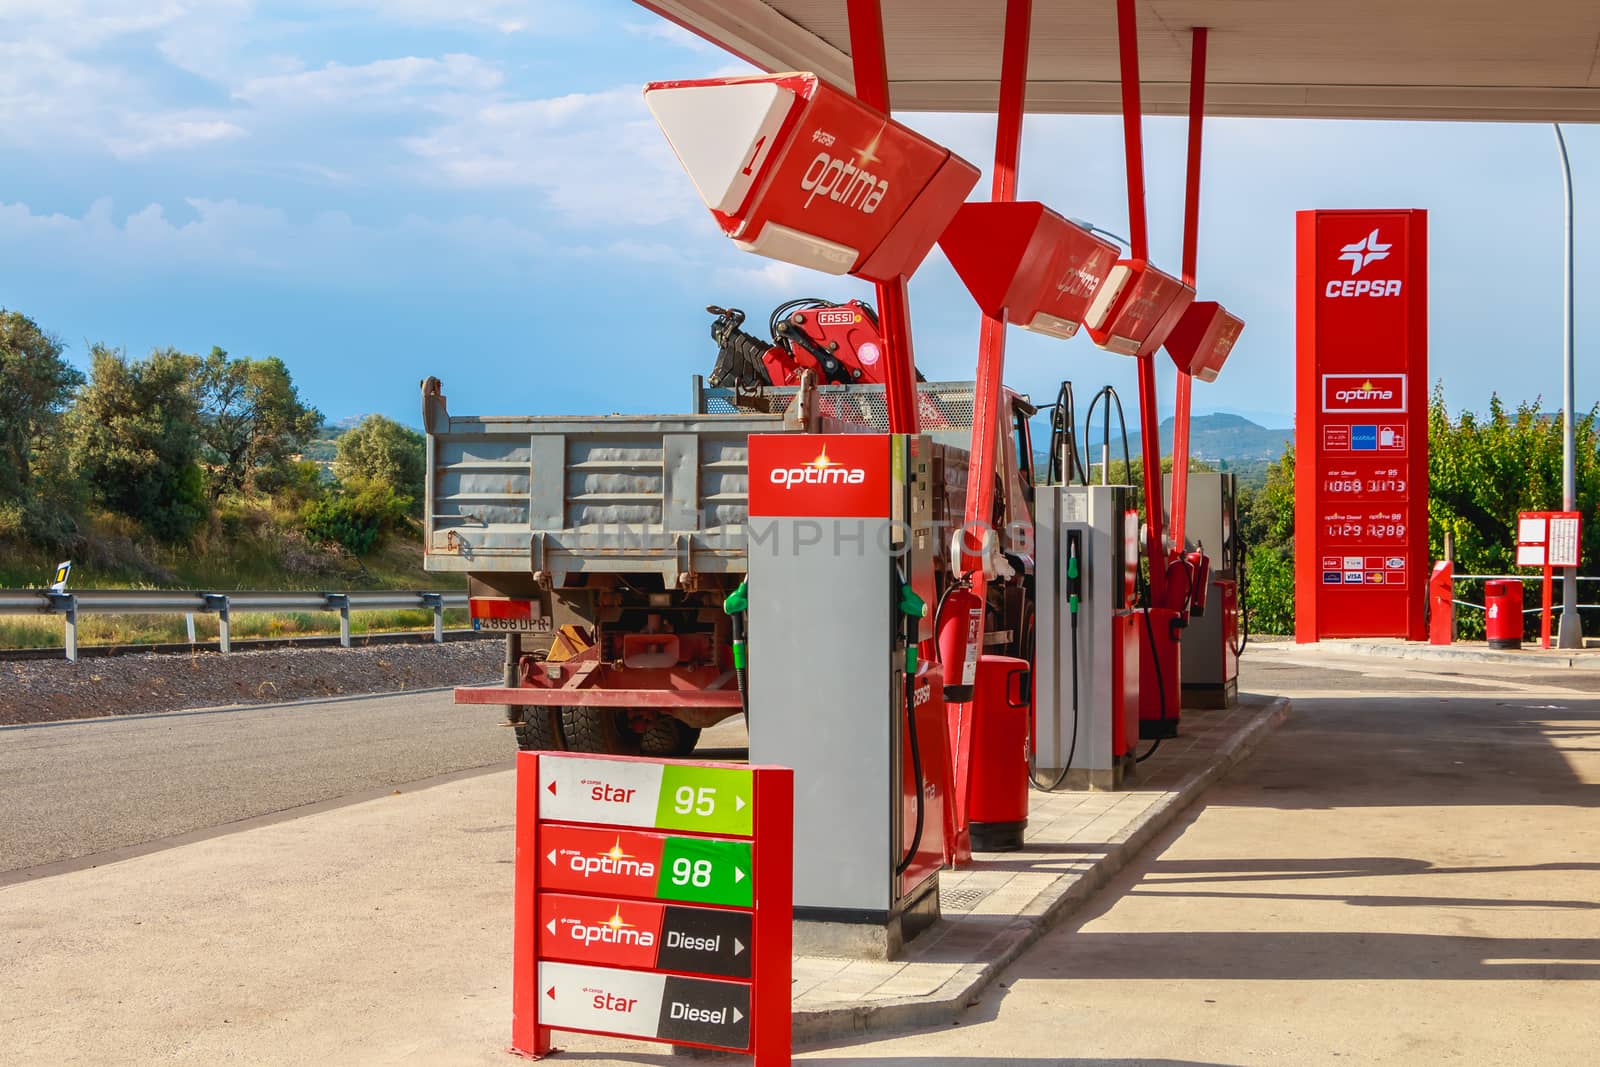 Huesca, Spain - June 21, 2017 : detail of a CEPSA gas station on a small country road with its price panels and fuel pumps at the end of the day